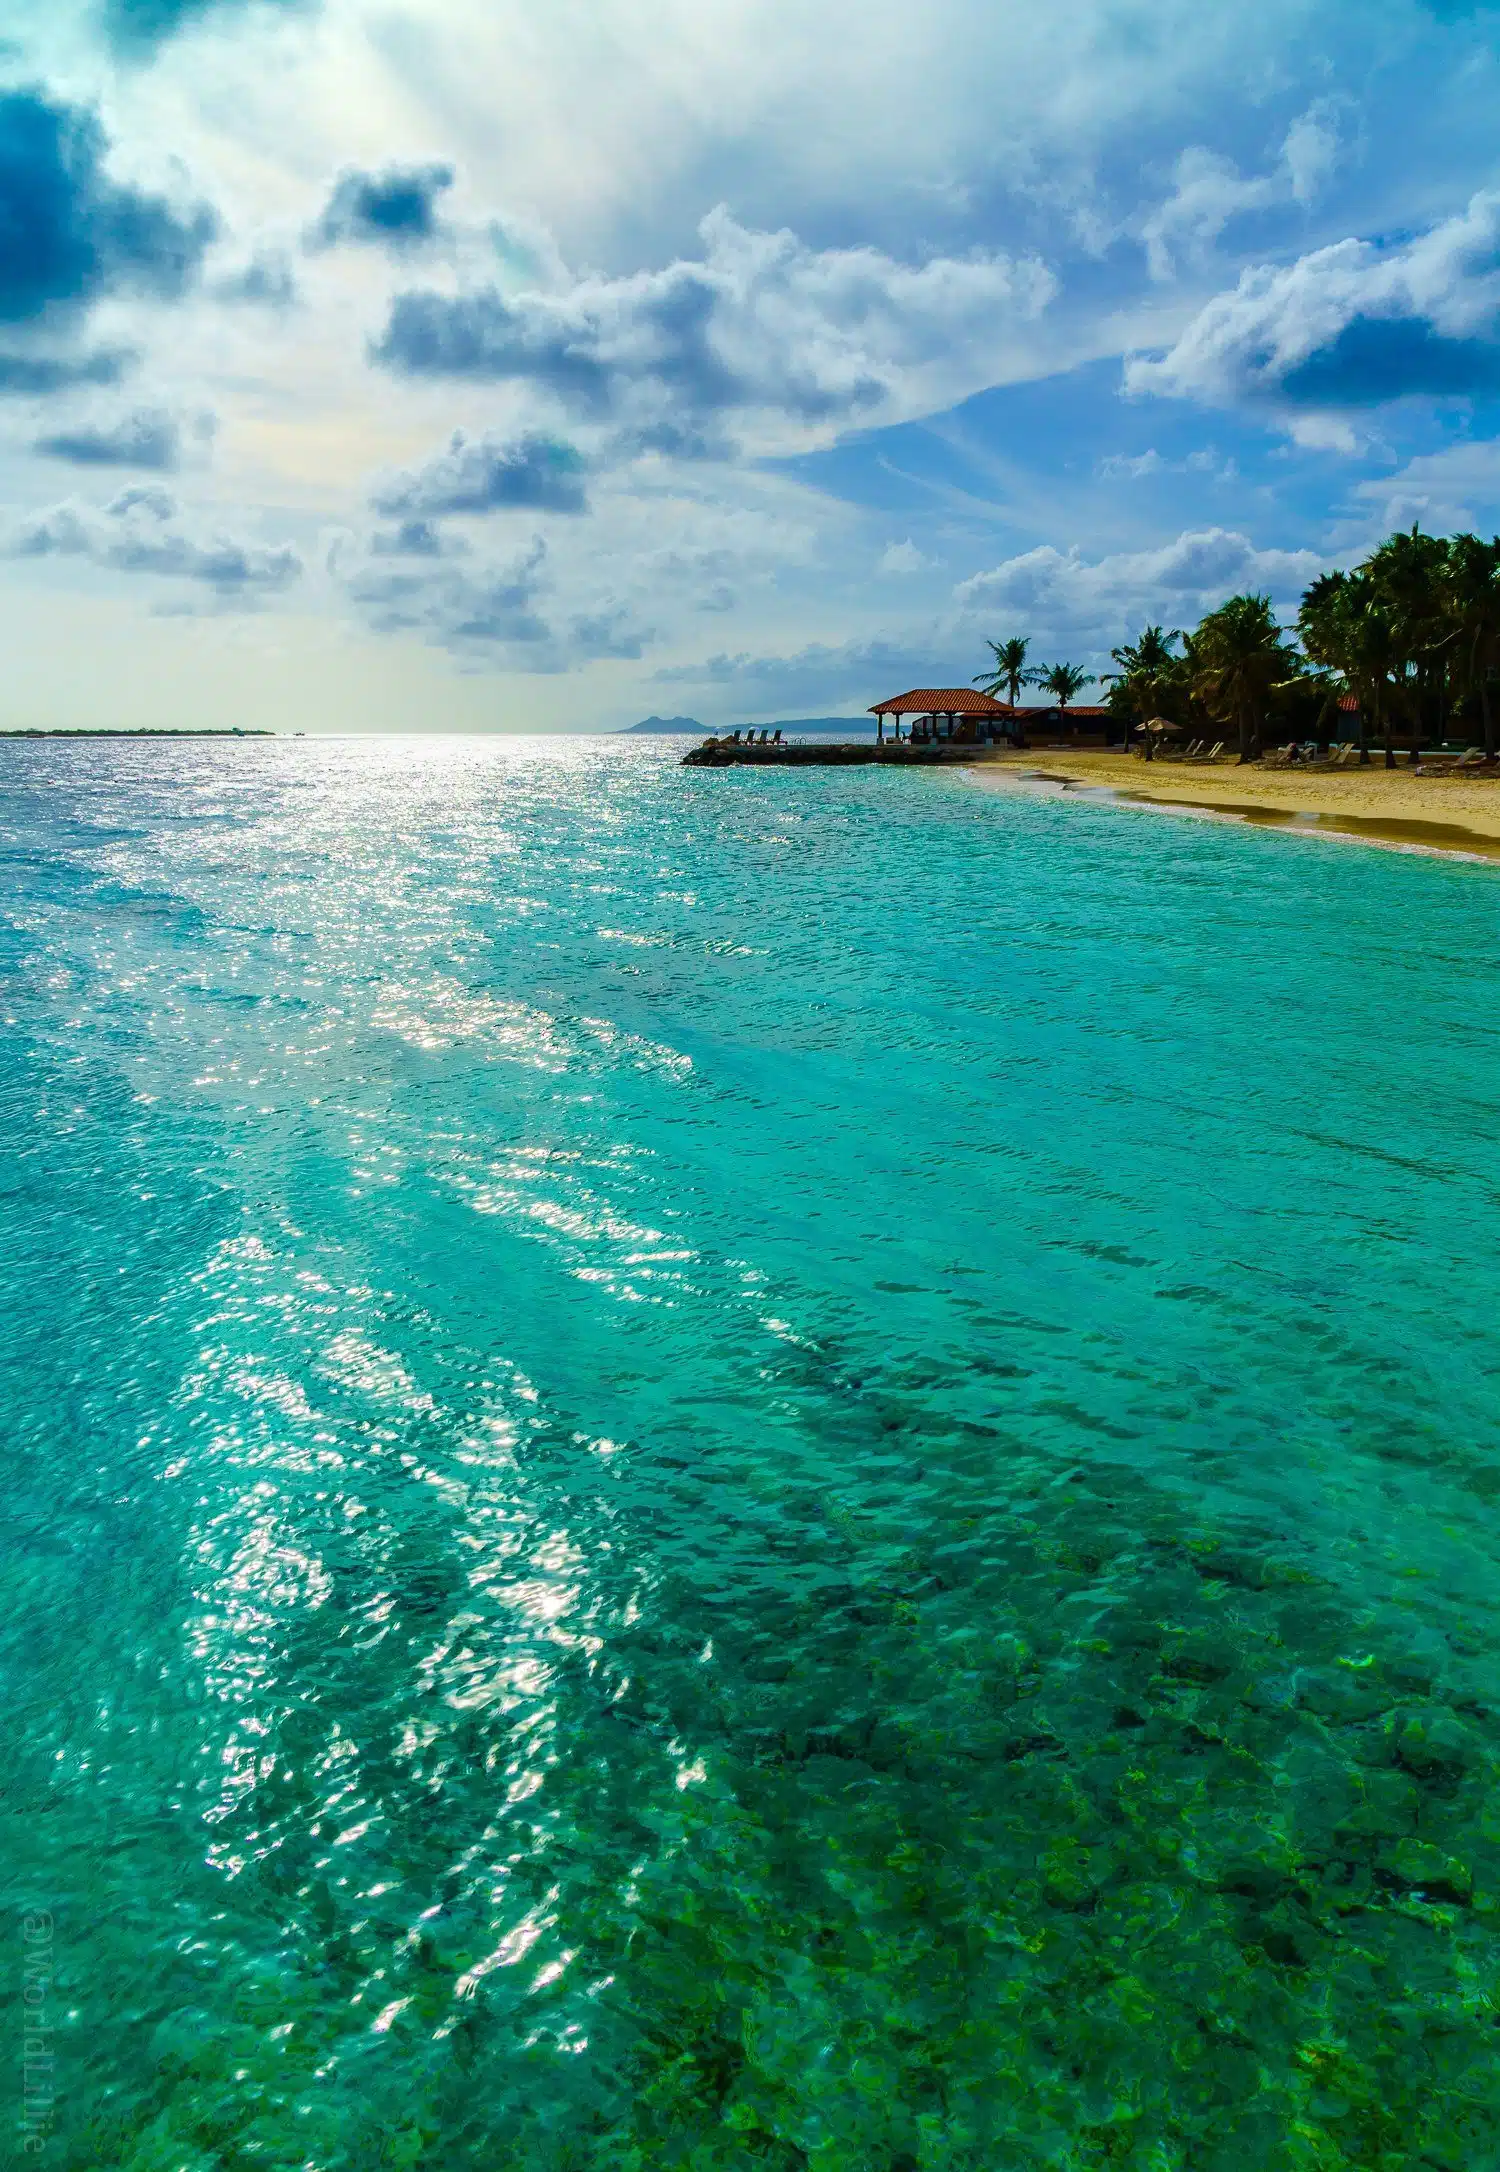 Now that's a beauty of a Caribbean beach. Bonaire is a fascinating island near Aruba that many don't know about.